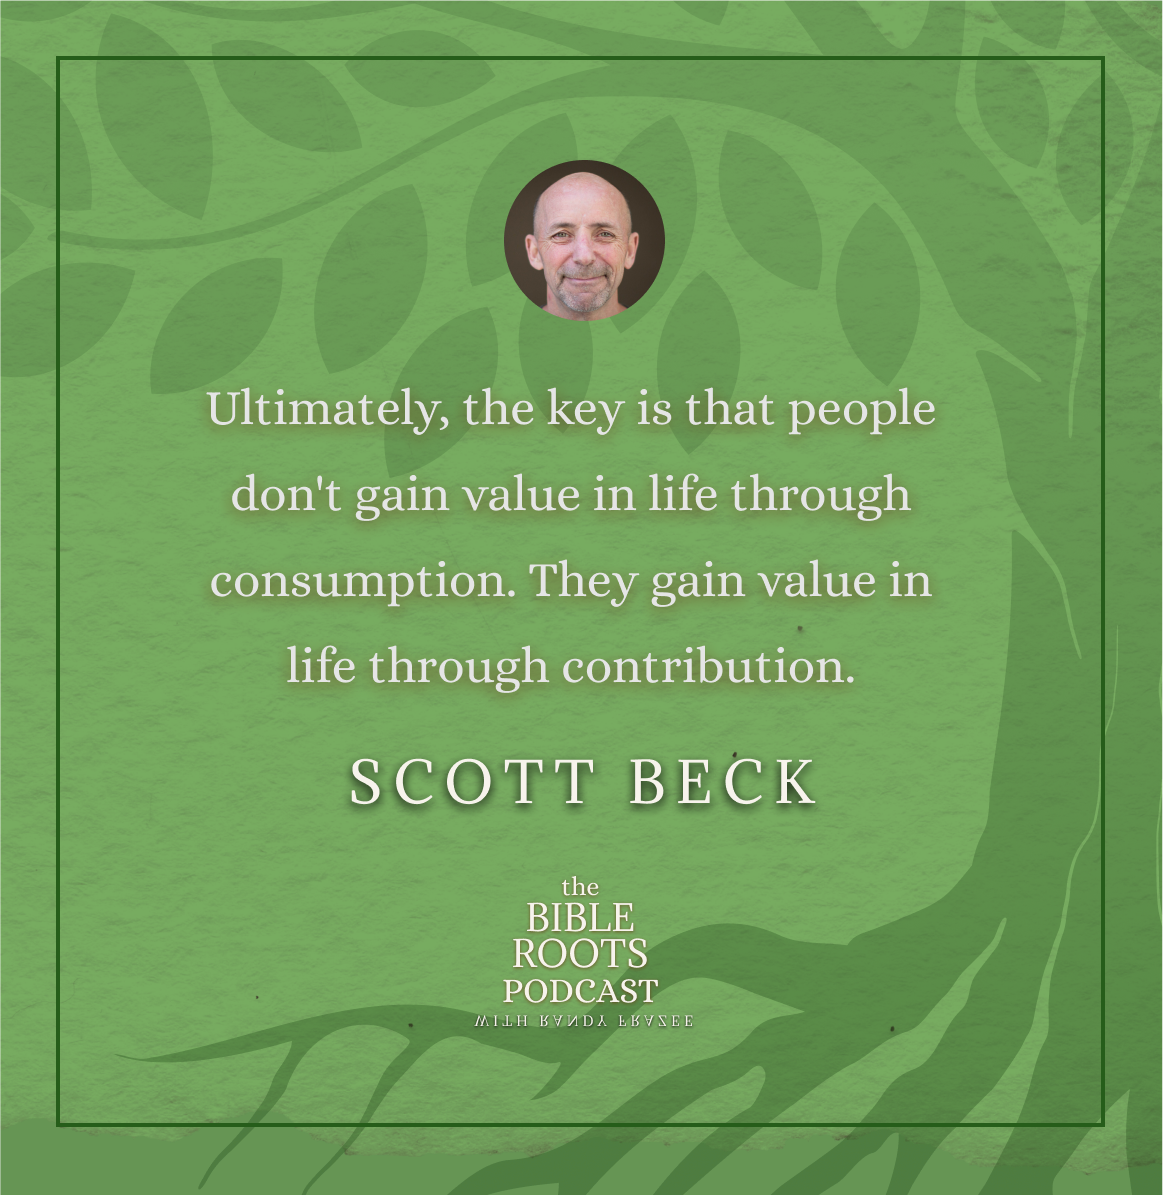 Ultimately, the key is that people don't gain value in life through consumption. They gain value in life through contribution. Scott Beck